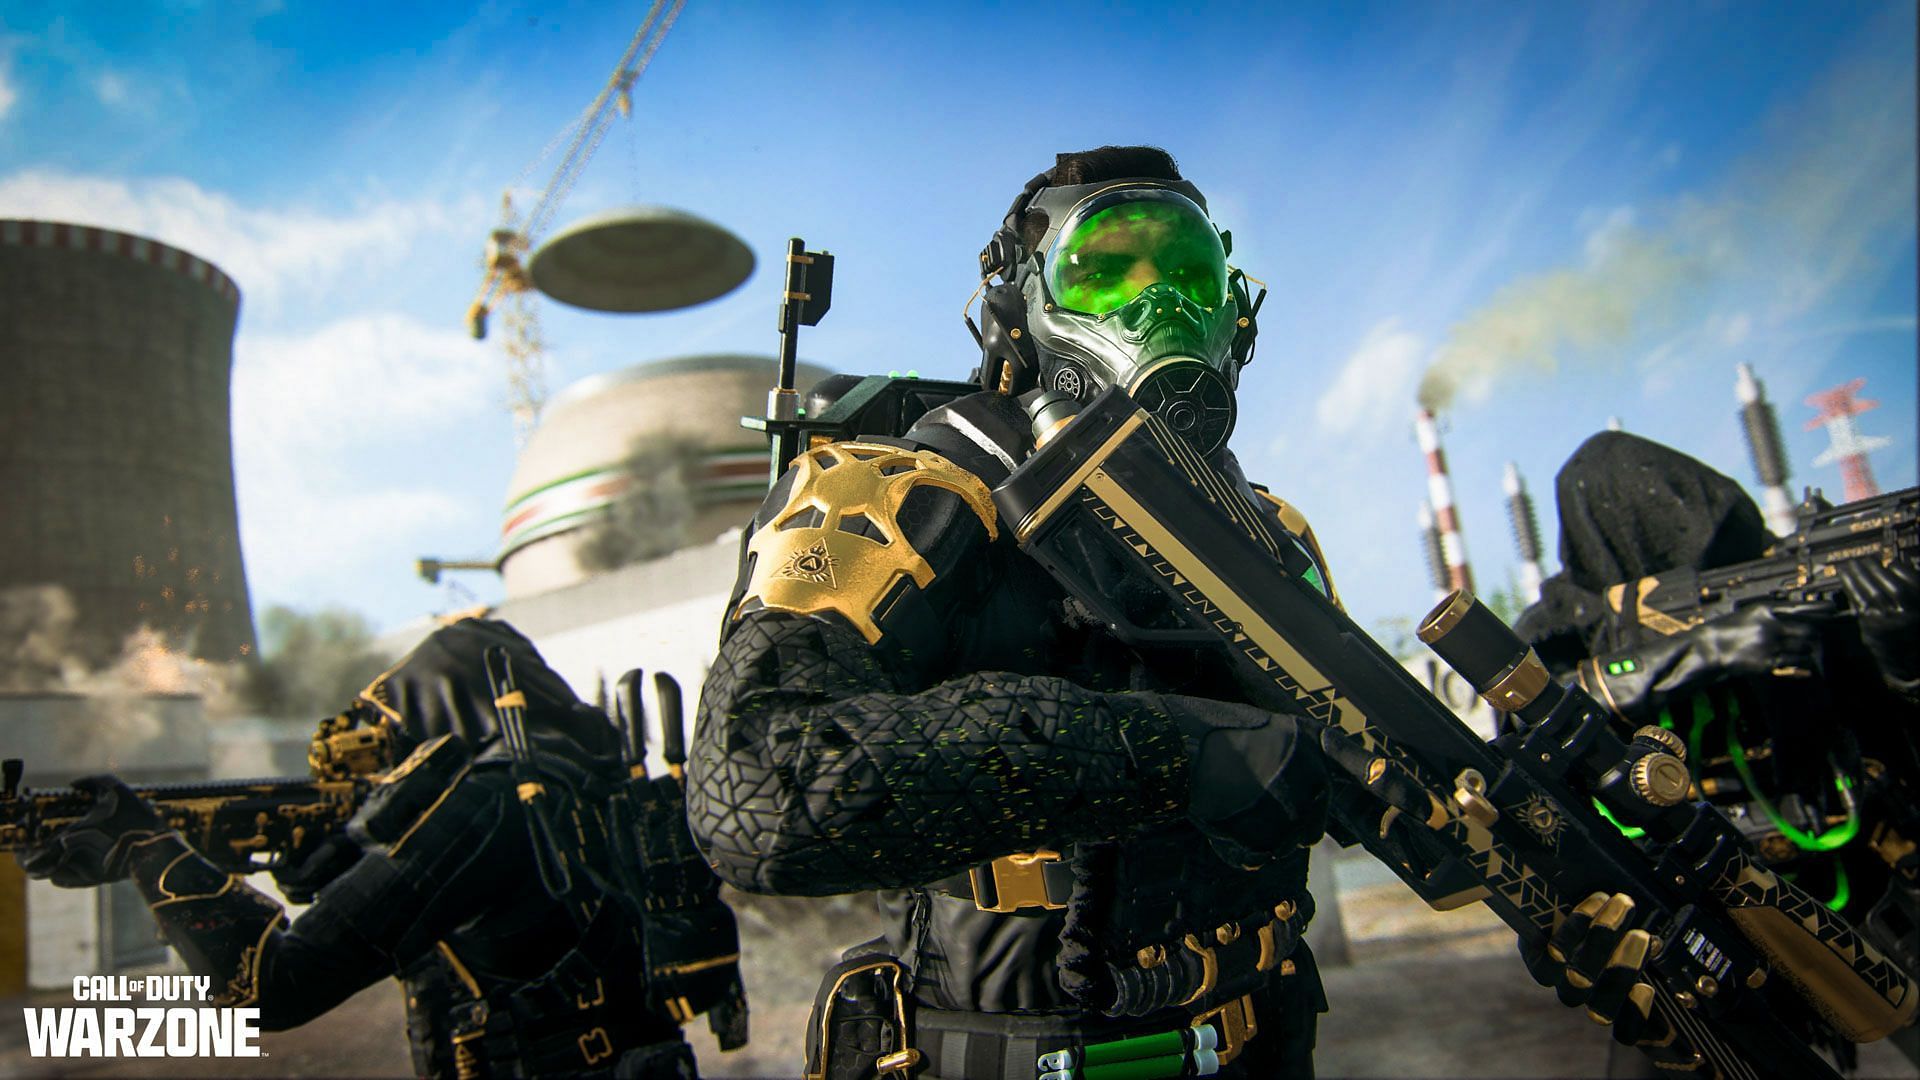 An Operator equipped with a Gas Mask in Warzone